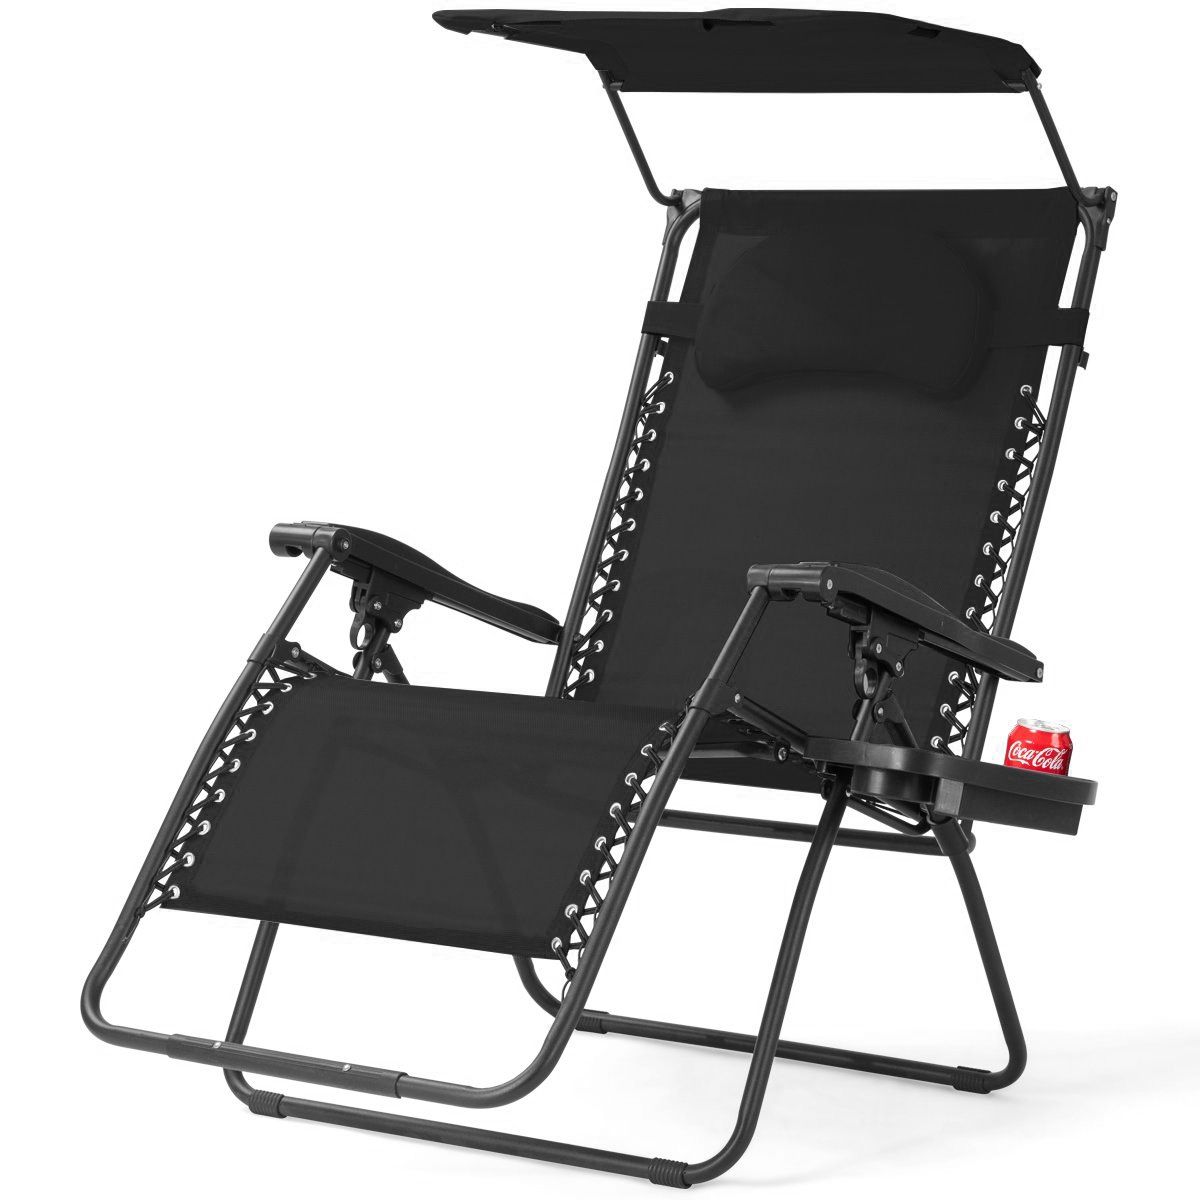 Most Current Garden Oversized Chairs With Sunshade And Drink Tray Intended For Folding Recliner Lounge Chair W/ Shade Canopy Cup Holder (View 14 of 25)